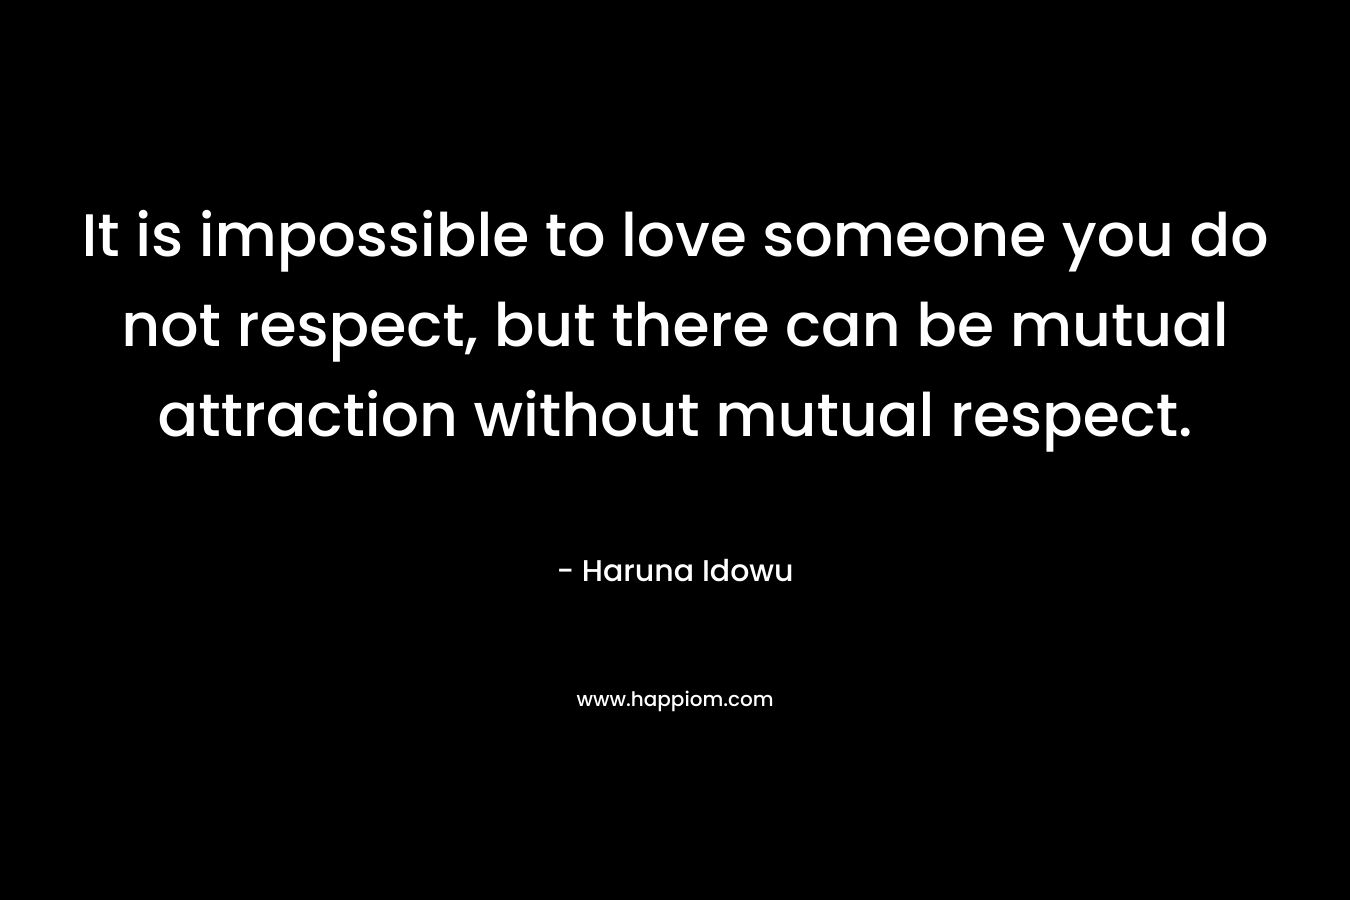 It is impossible to love someone you do not respect, but there can be mutual attraction without mutual respect.